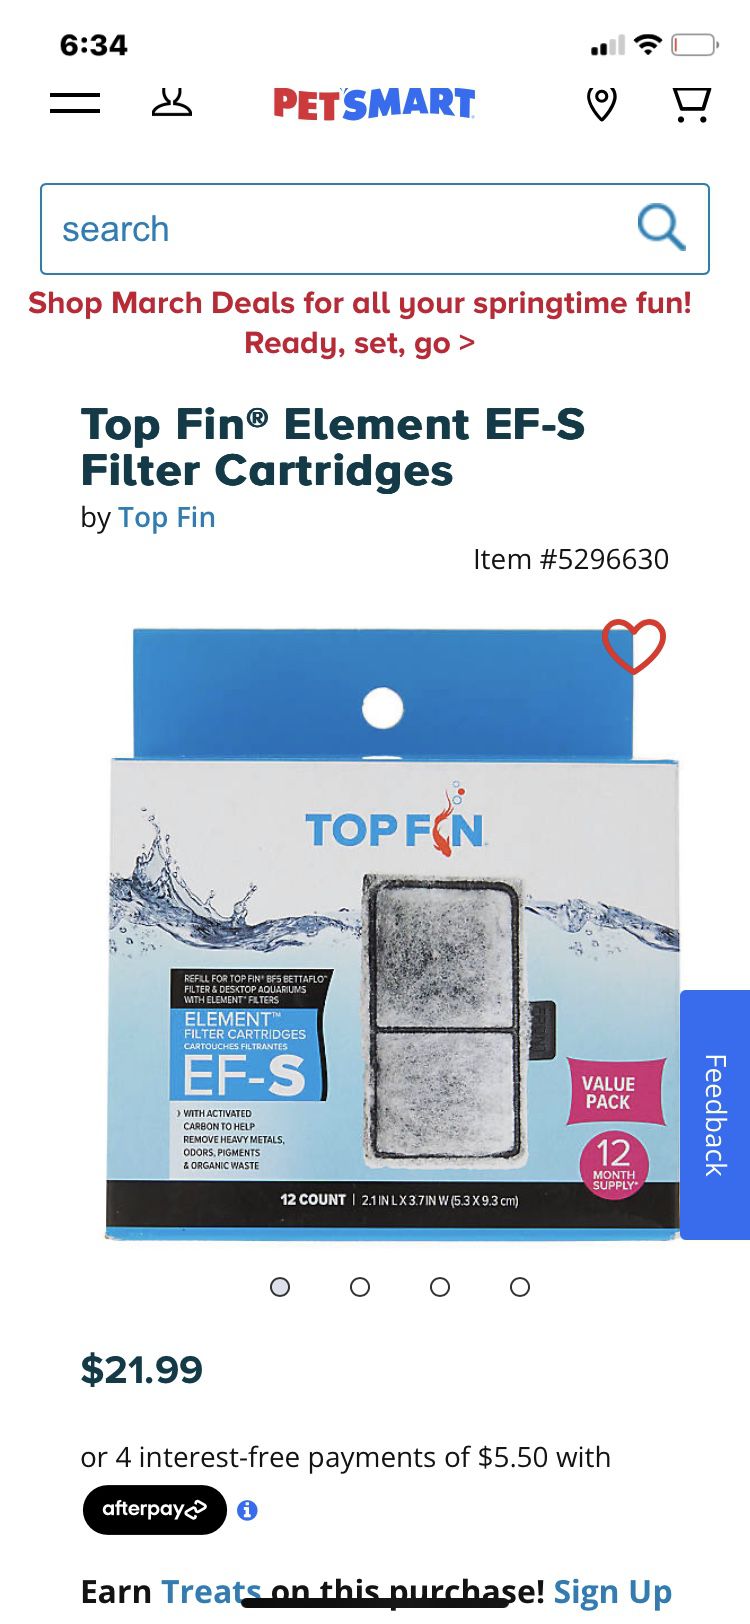 NEW Top Fin 10 Count Filter Cartridges $10